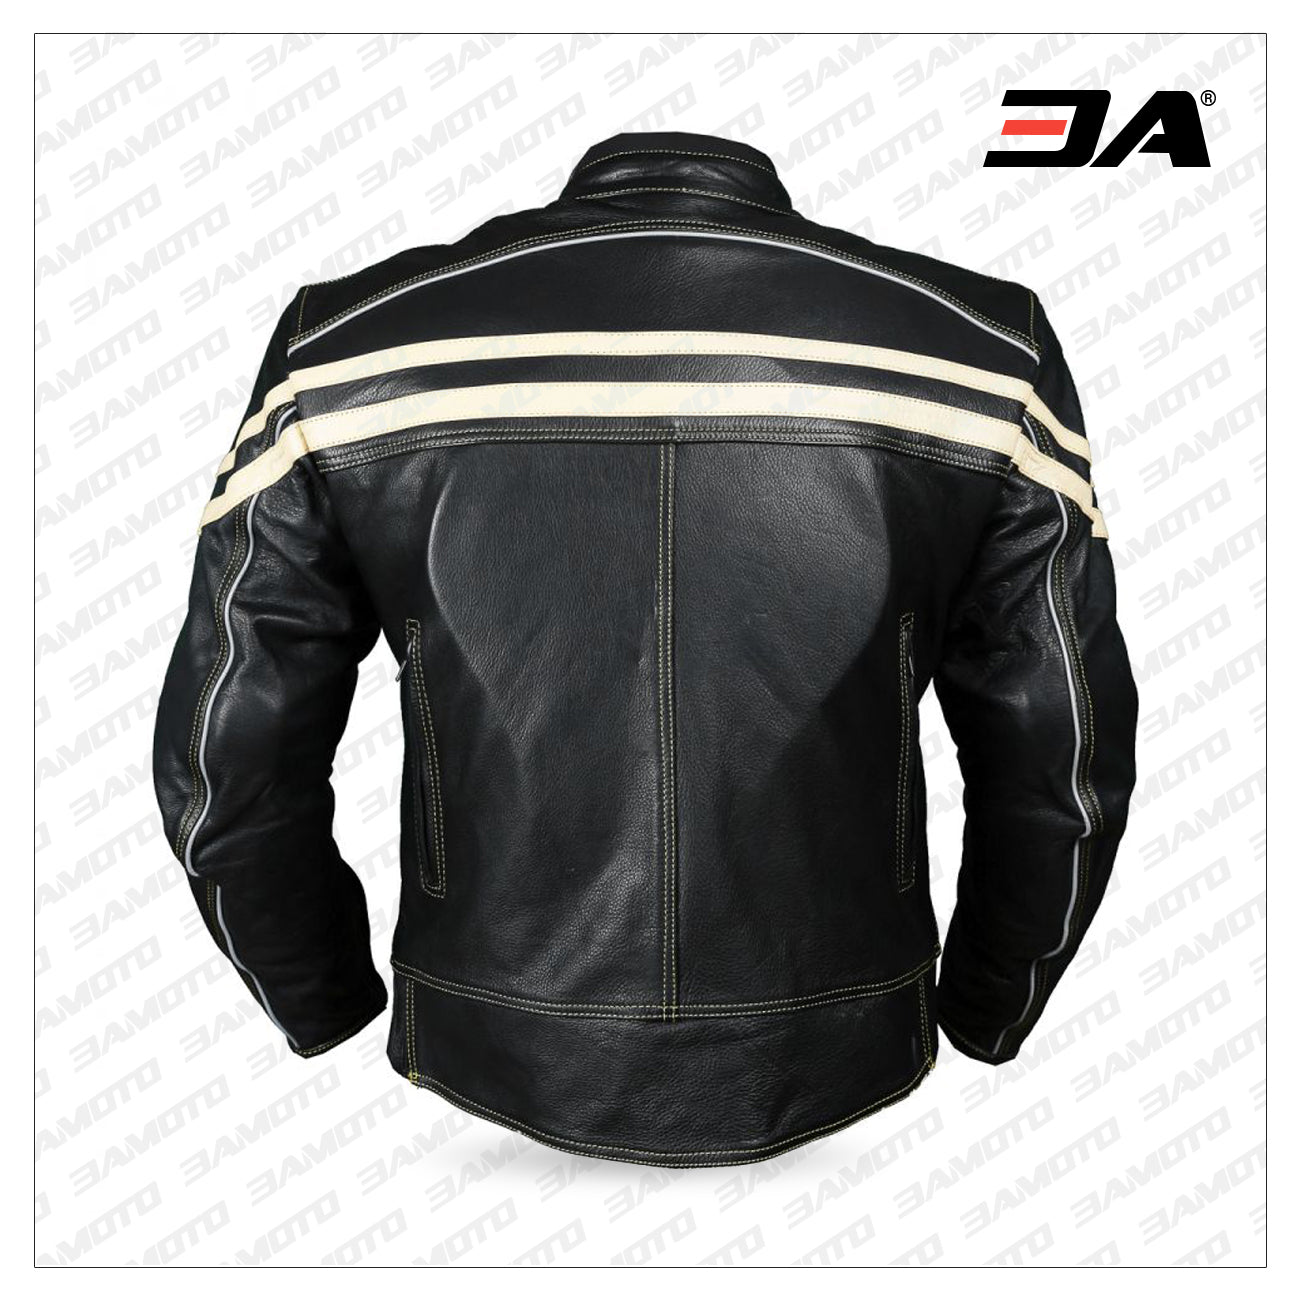 Drifter Mk2 Cruiser Touring Style Leather Motorcycle Jacket